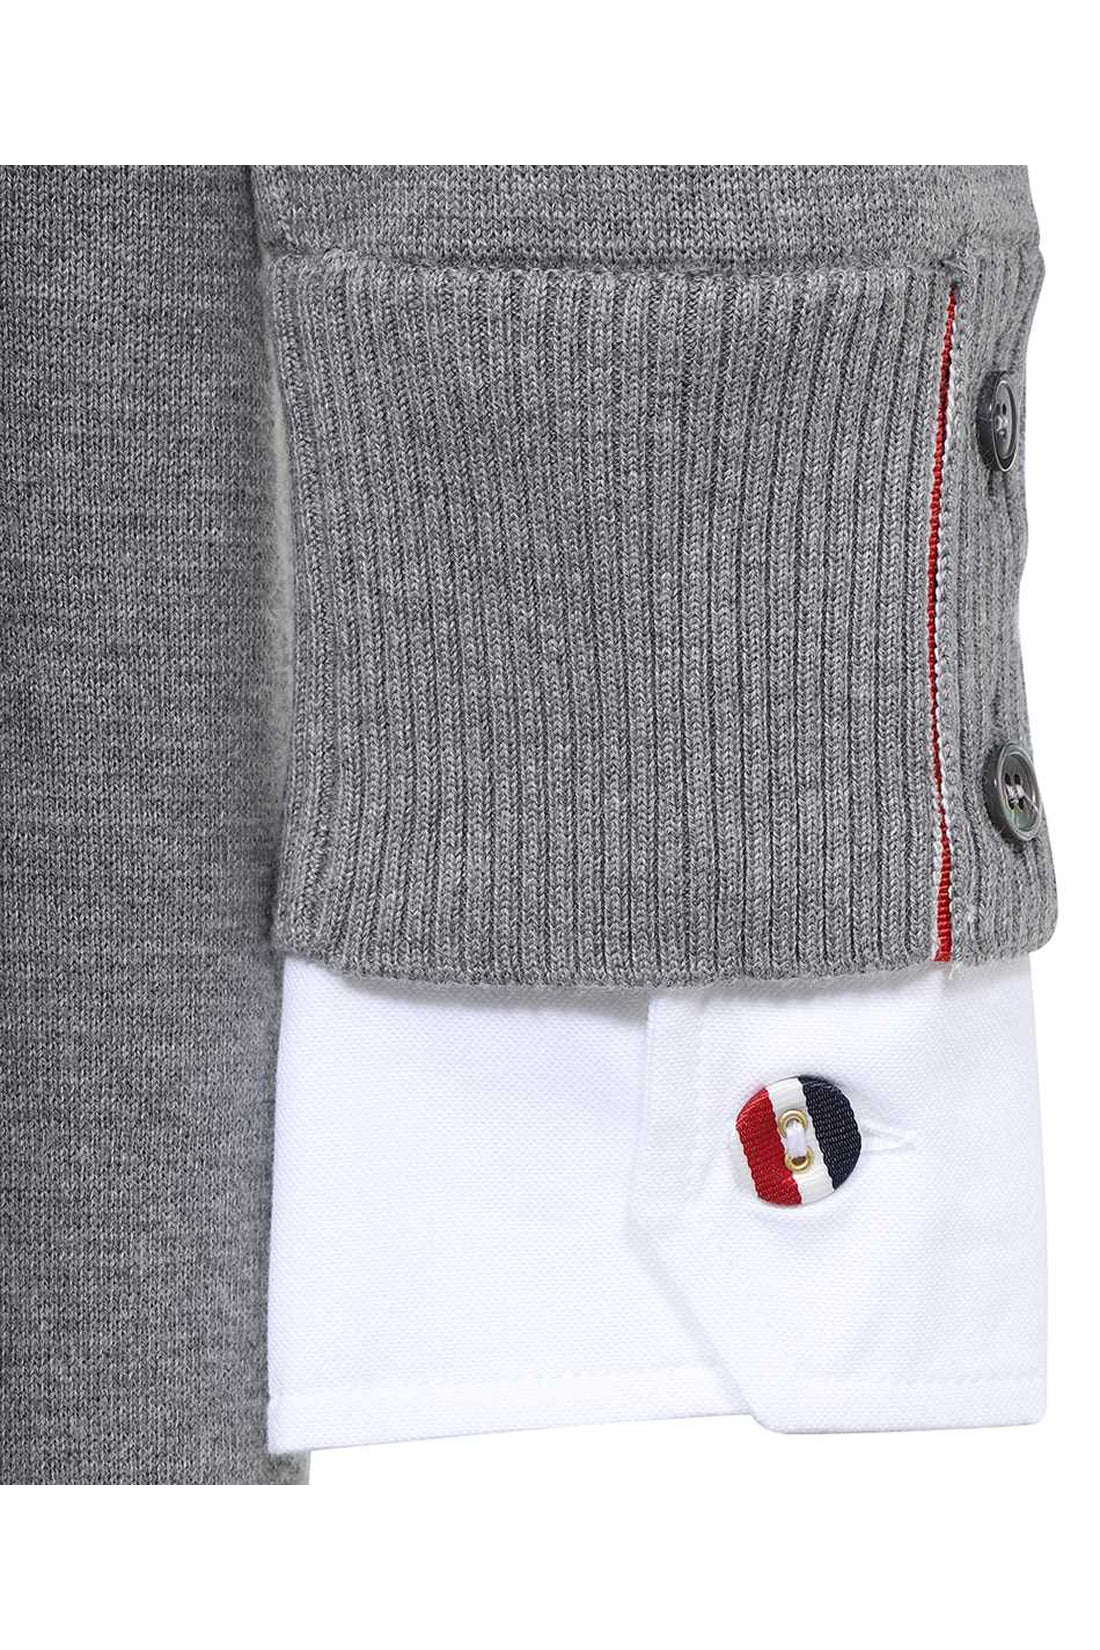 Thom Browne-OUTLET-SALE-Long knitted cardigan-ARCHIVIST